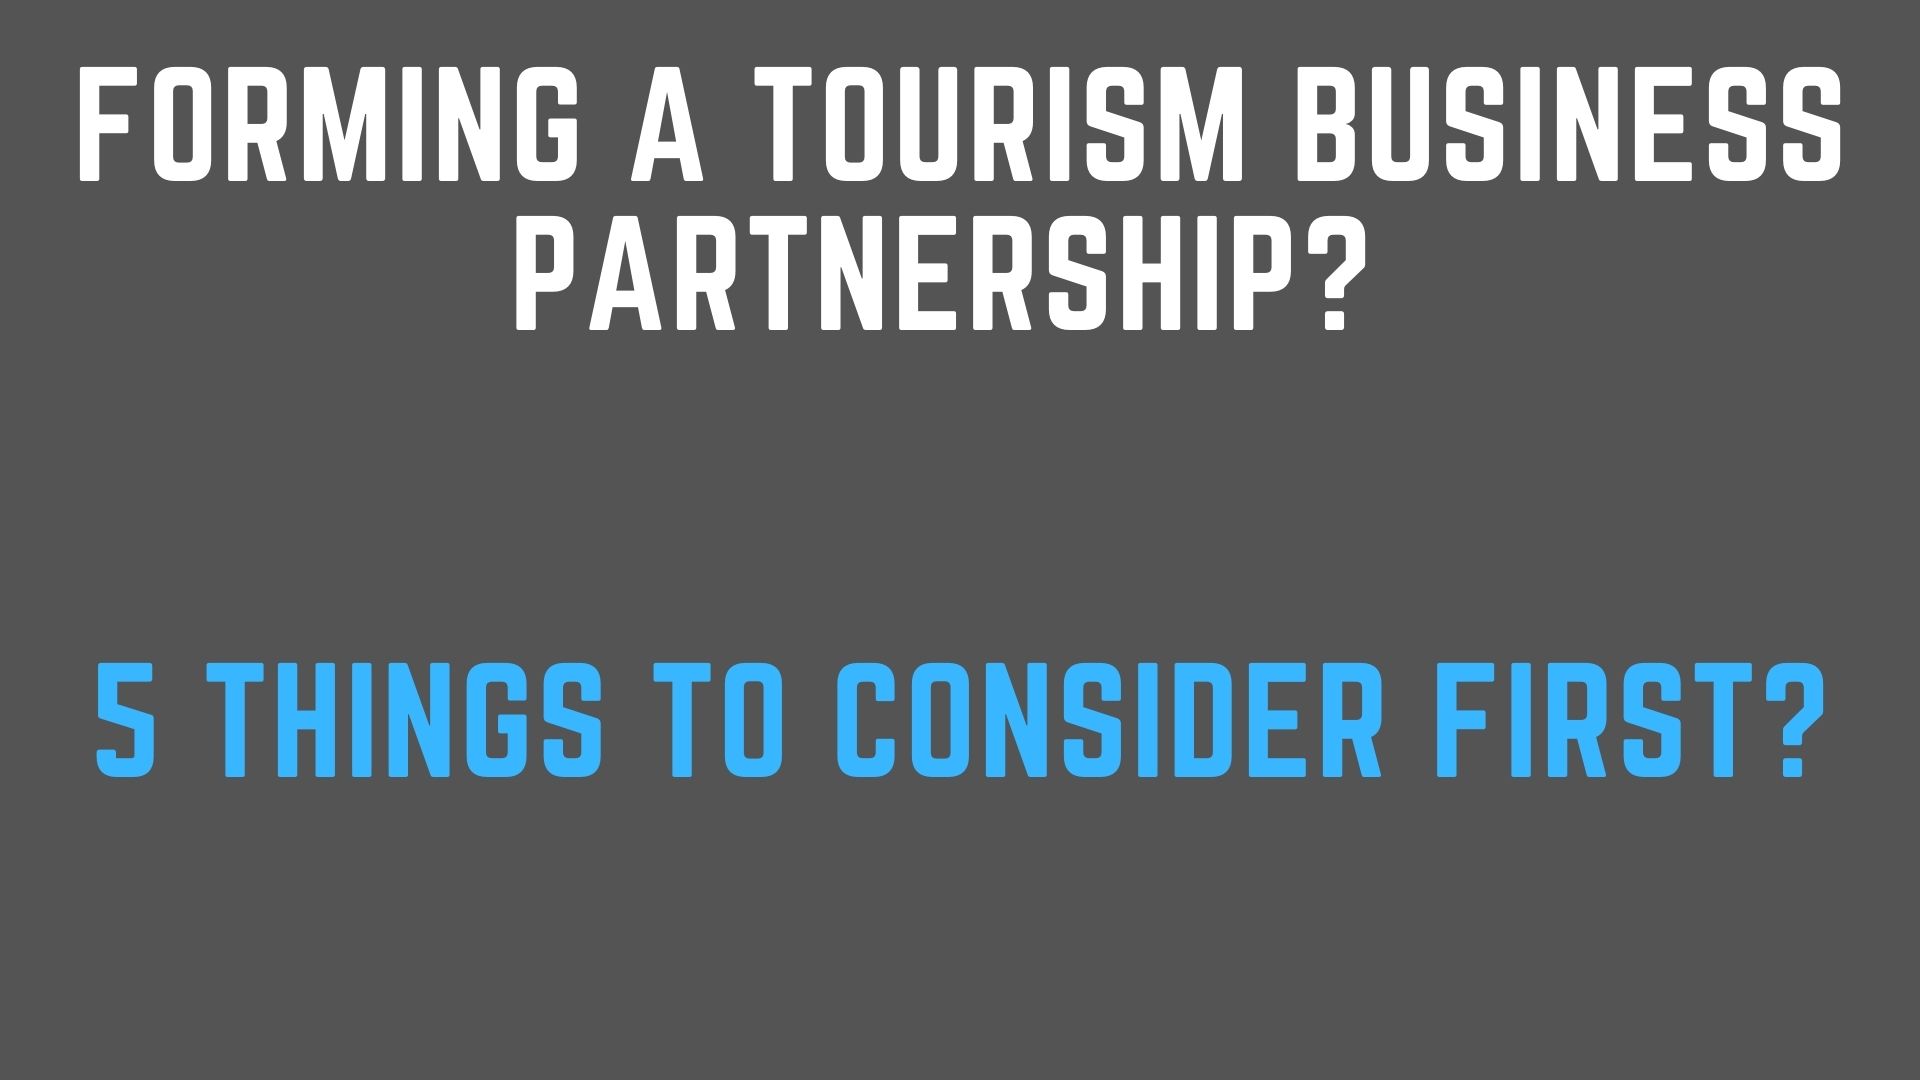 Partnership In The Tourism Business